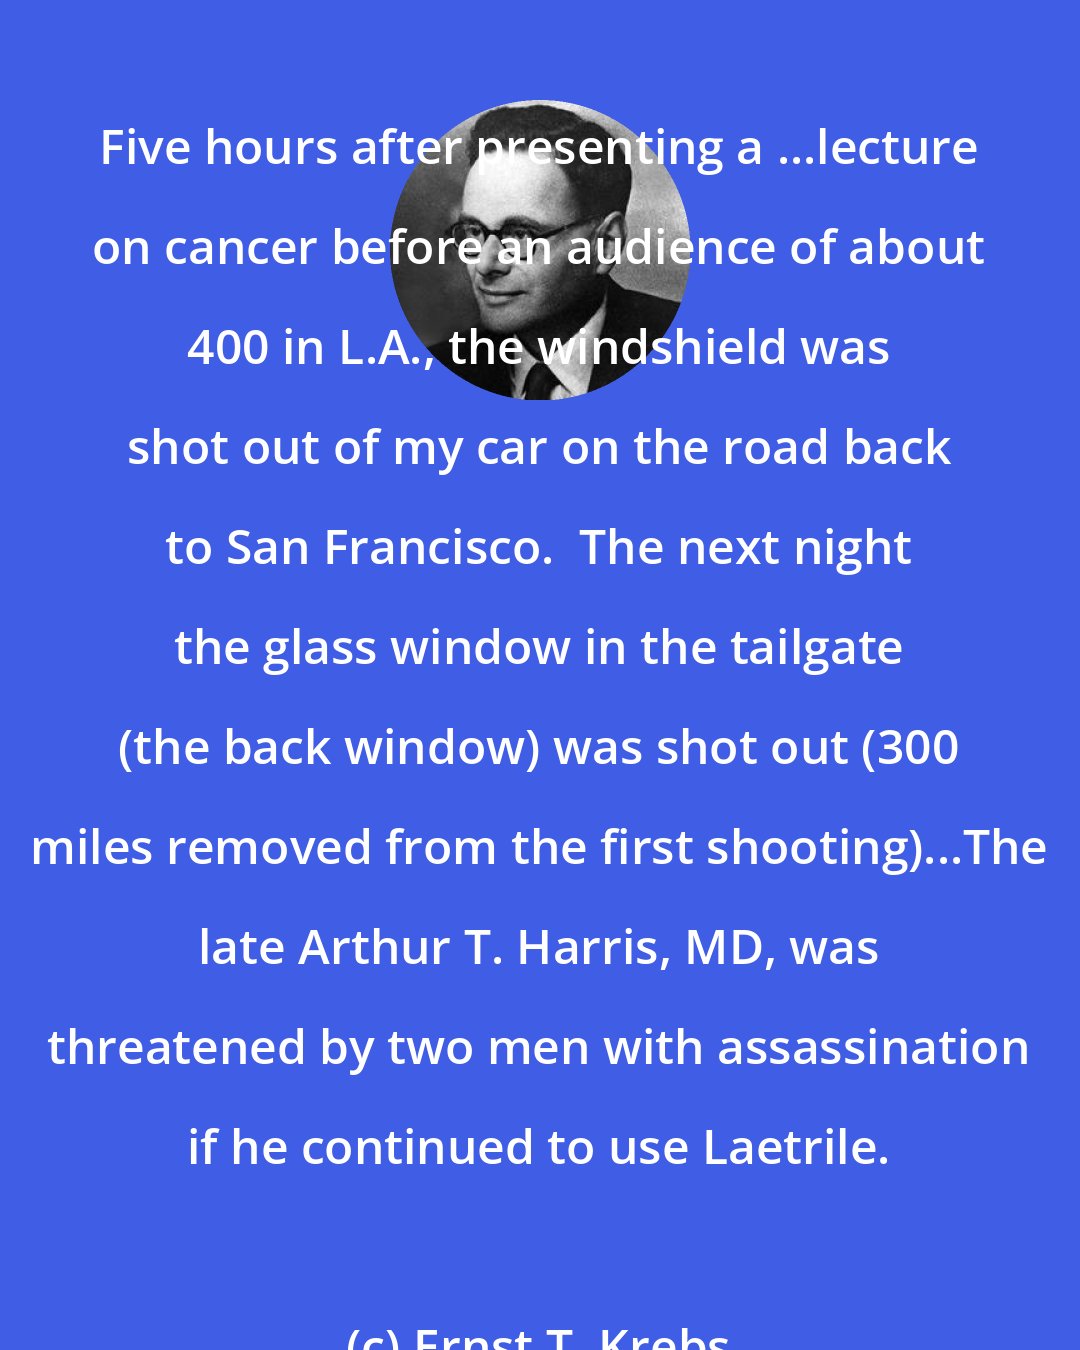 Ernst T. Krebs: Five hours after presenting a ...lecture on cancer before an audience of about 400 in L.A., the windshield was shot out of my car on the road back to San Francisco.  The next night the glass window in the tailgate (the back window) was shot out (300 miles removed from the first shooting)...The late Arthur T. Harris, MD, was threatened by two men with assassination if he continued to use Laetrile.